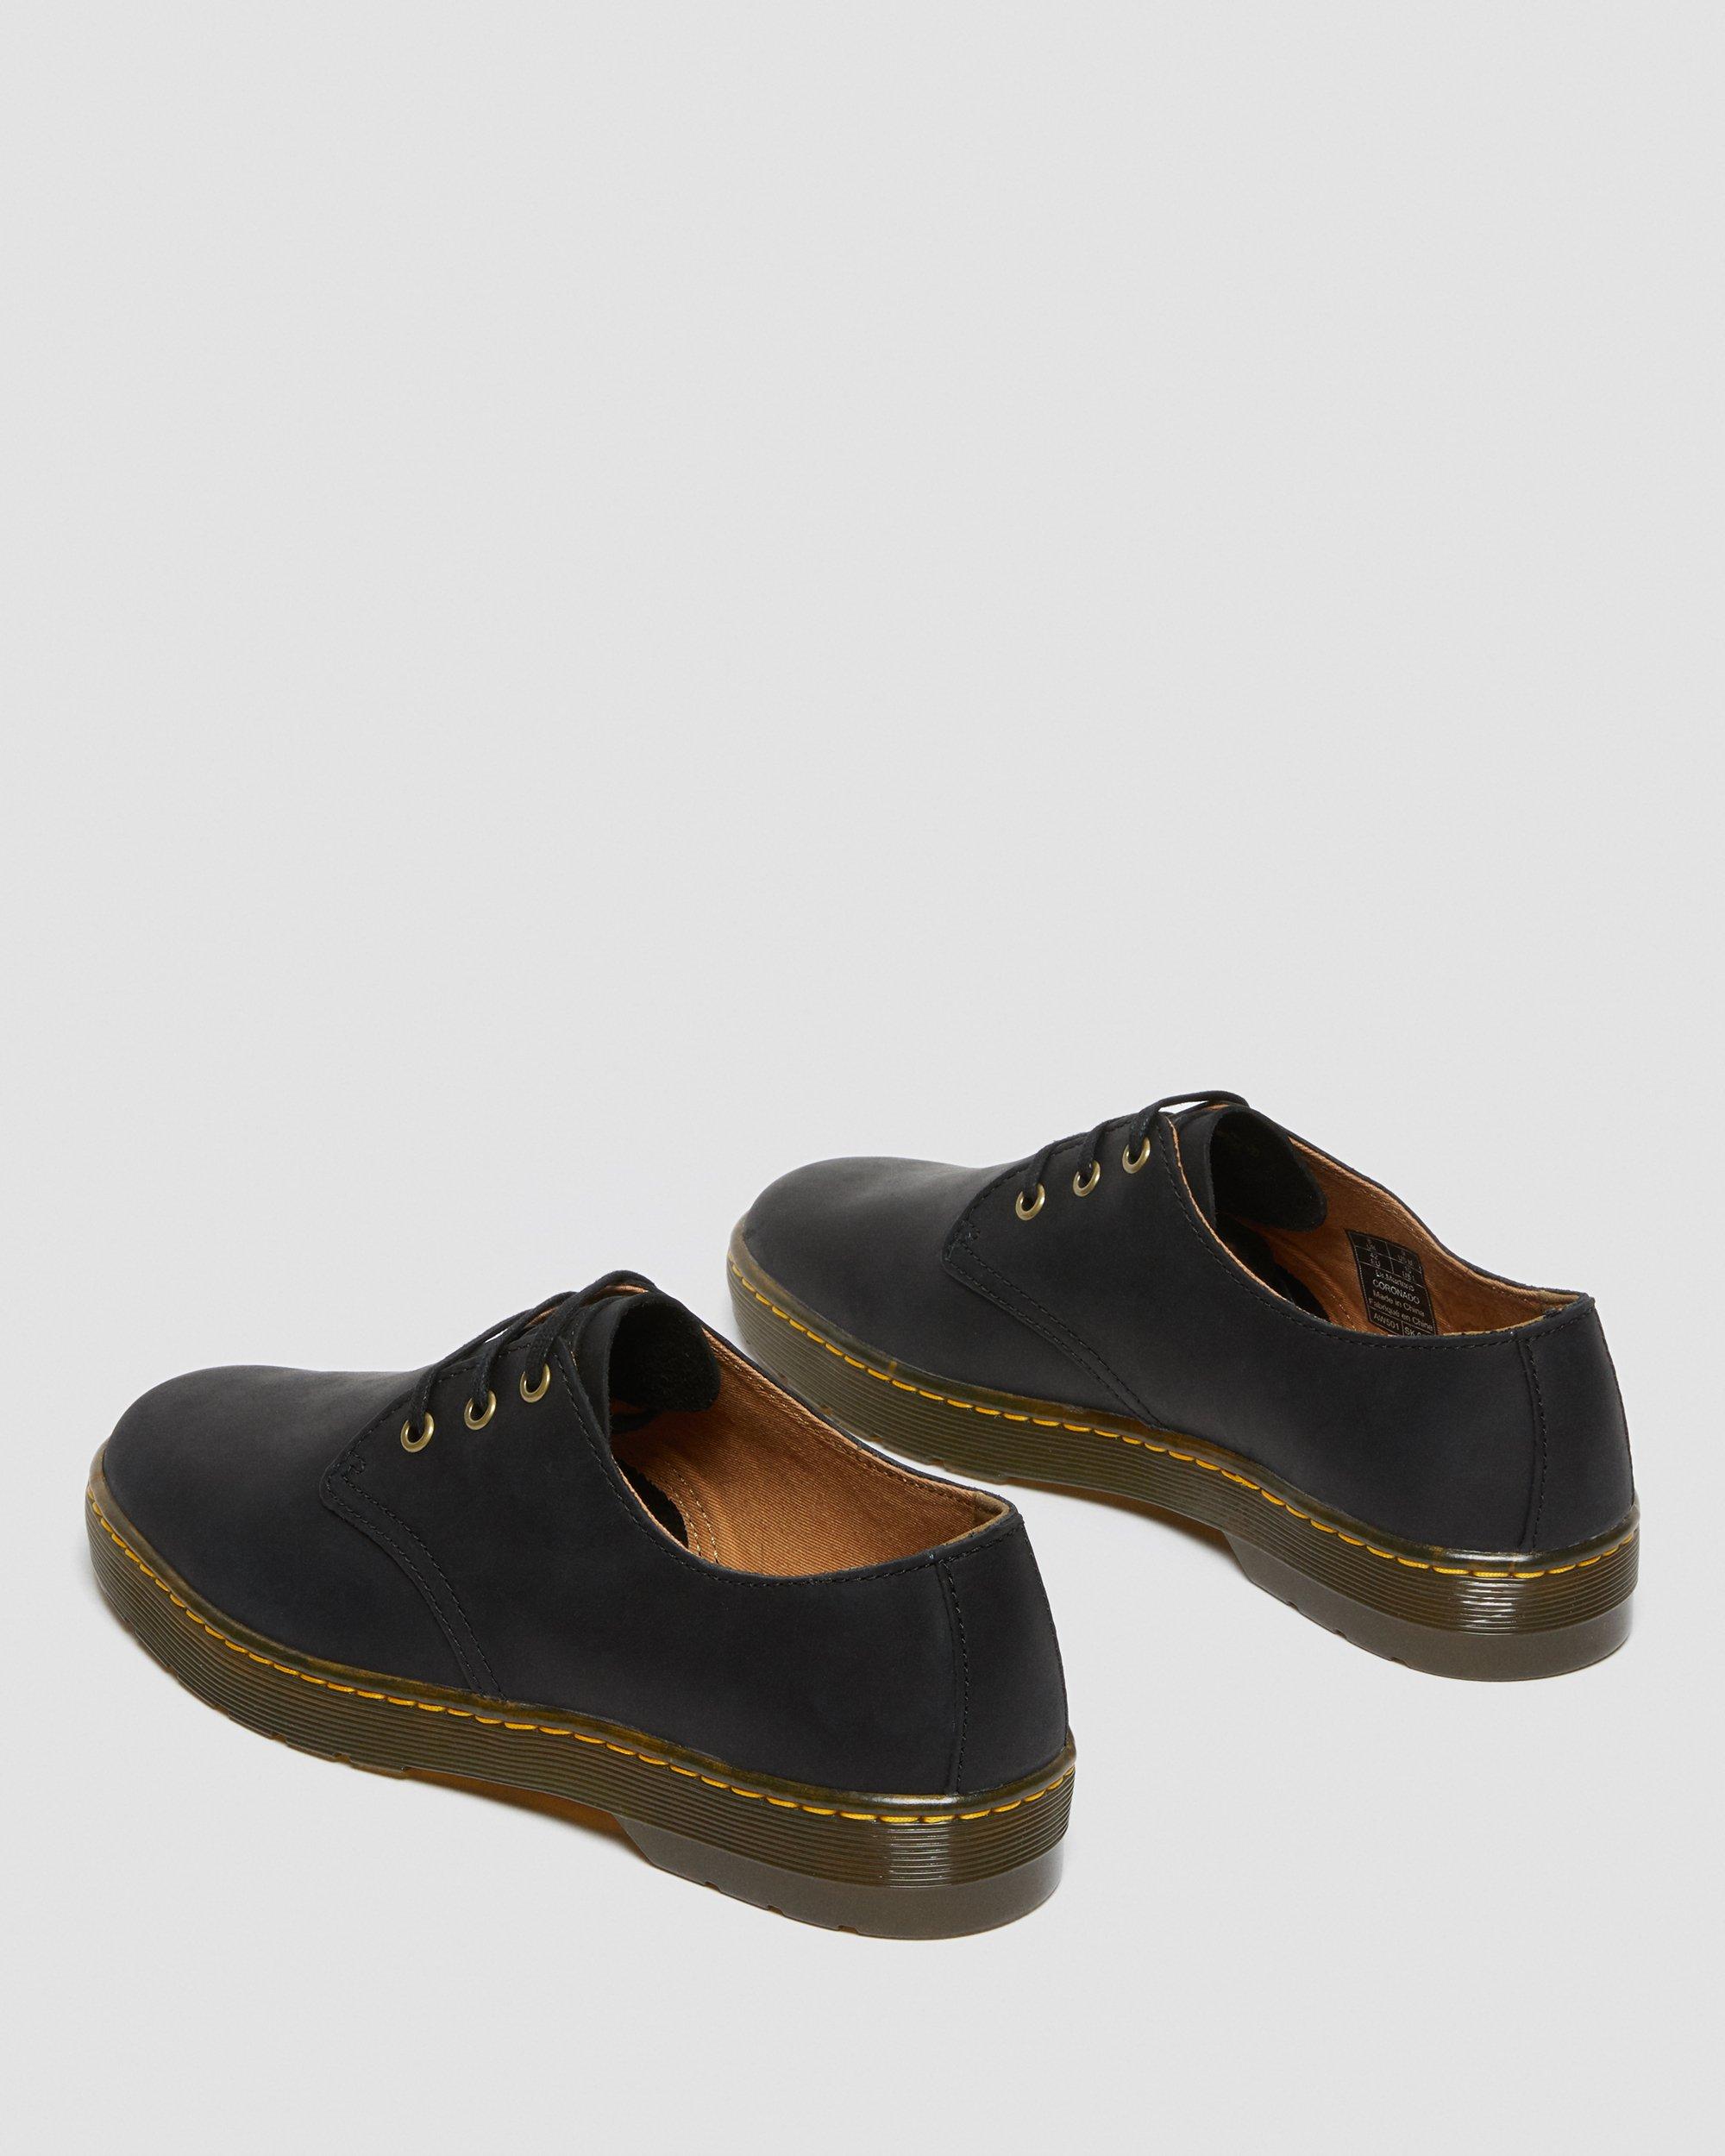 WYOMING LEATHER CASUAL SHOES | Dr. Martens